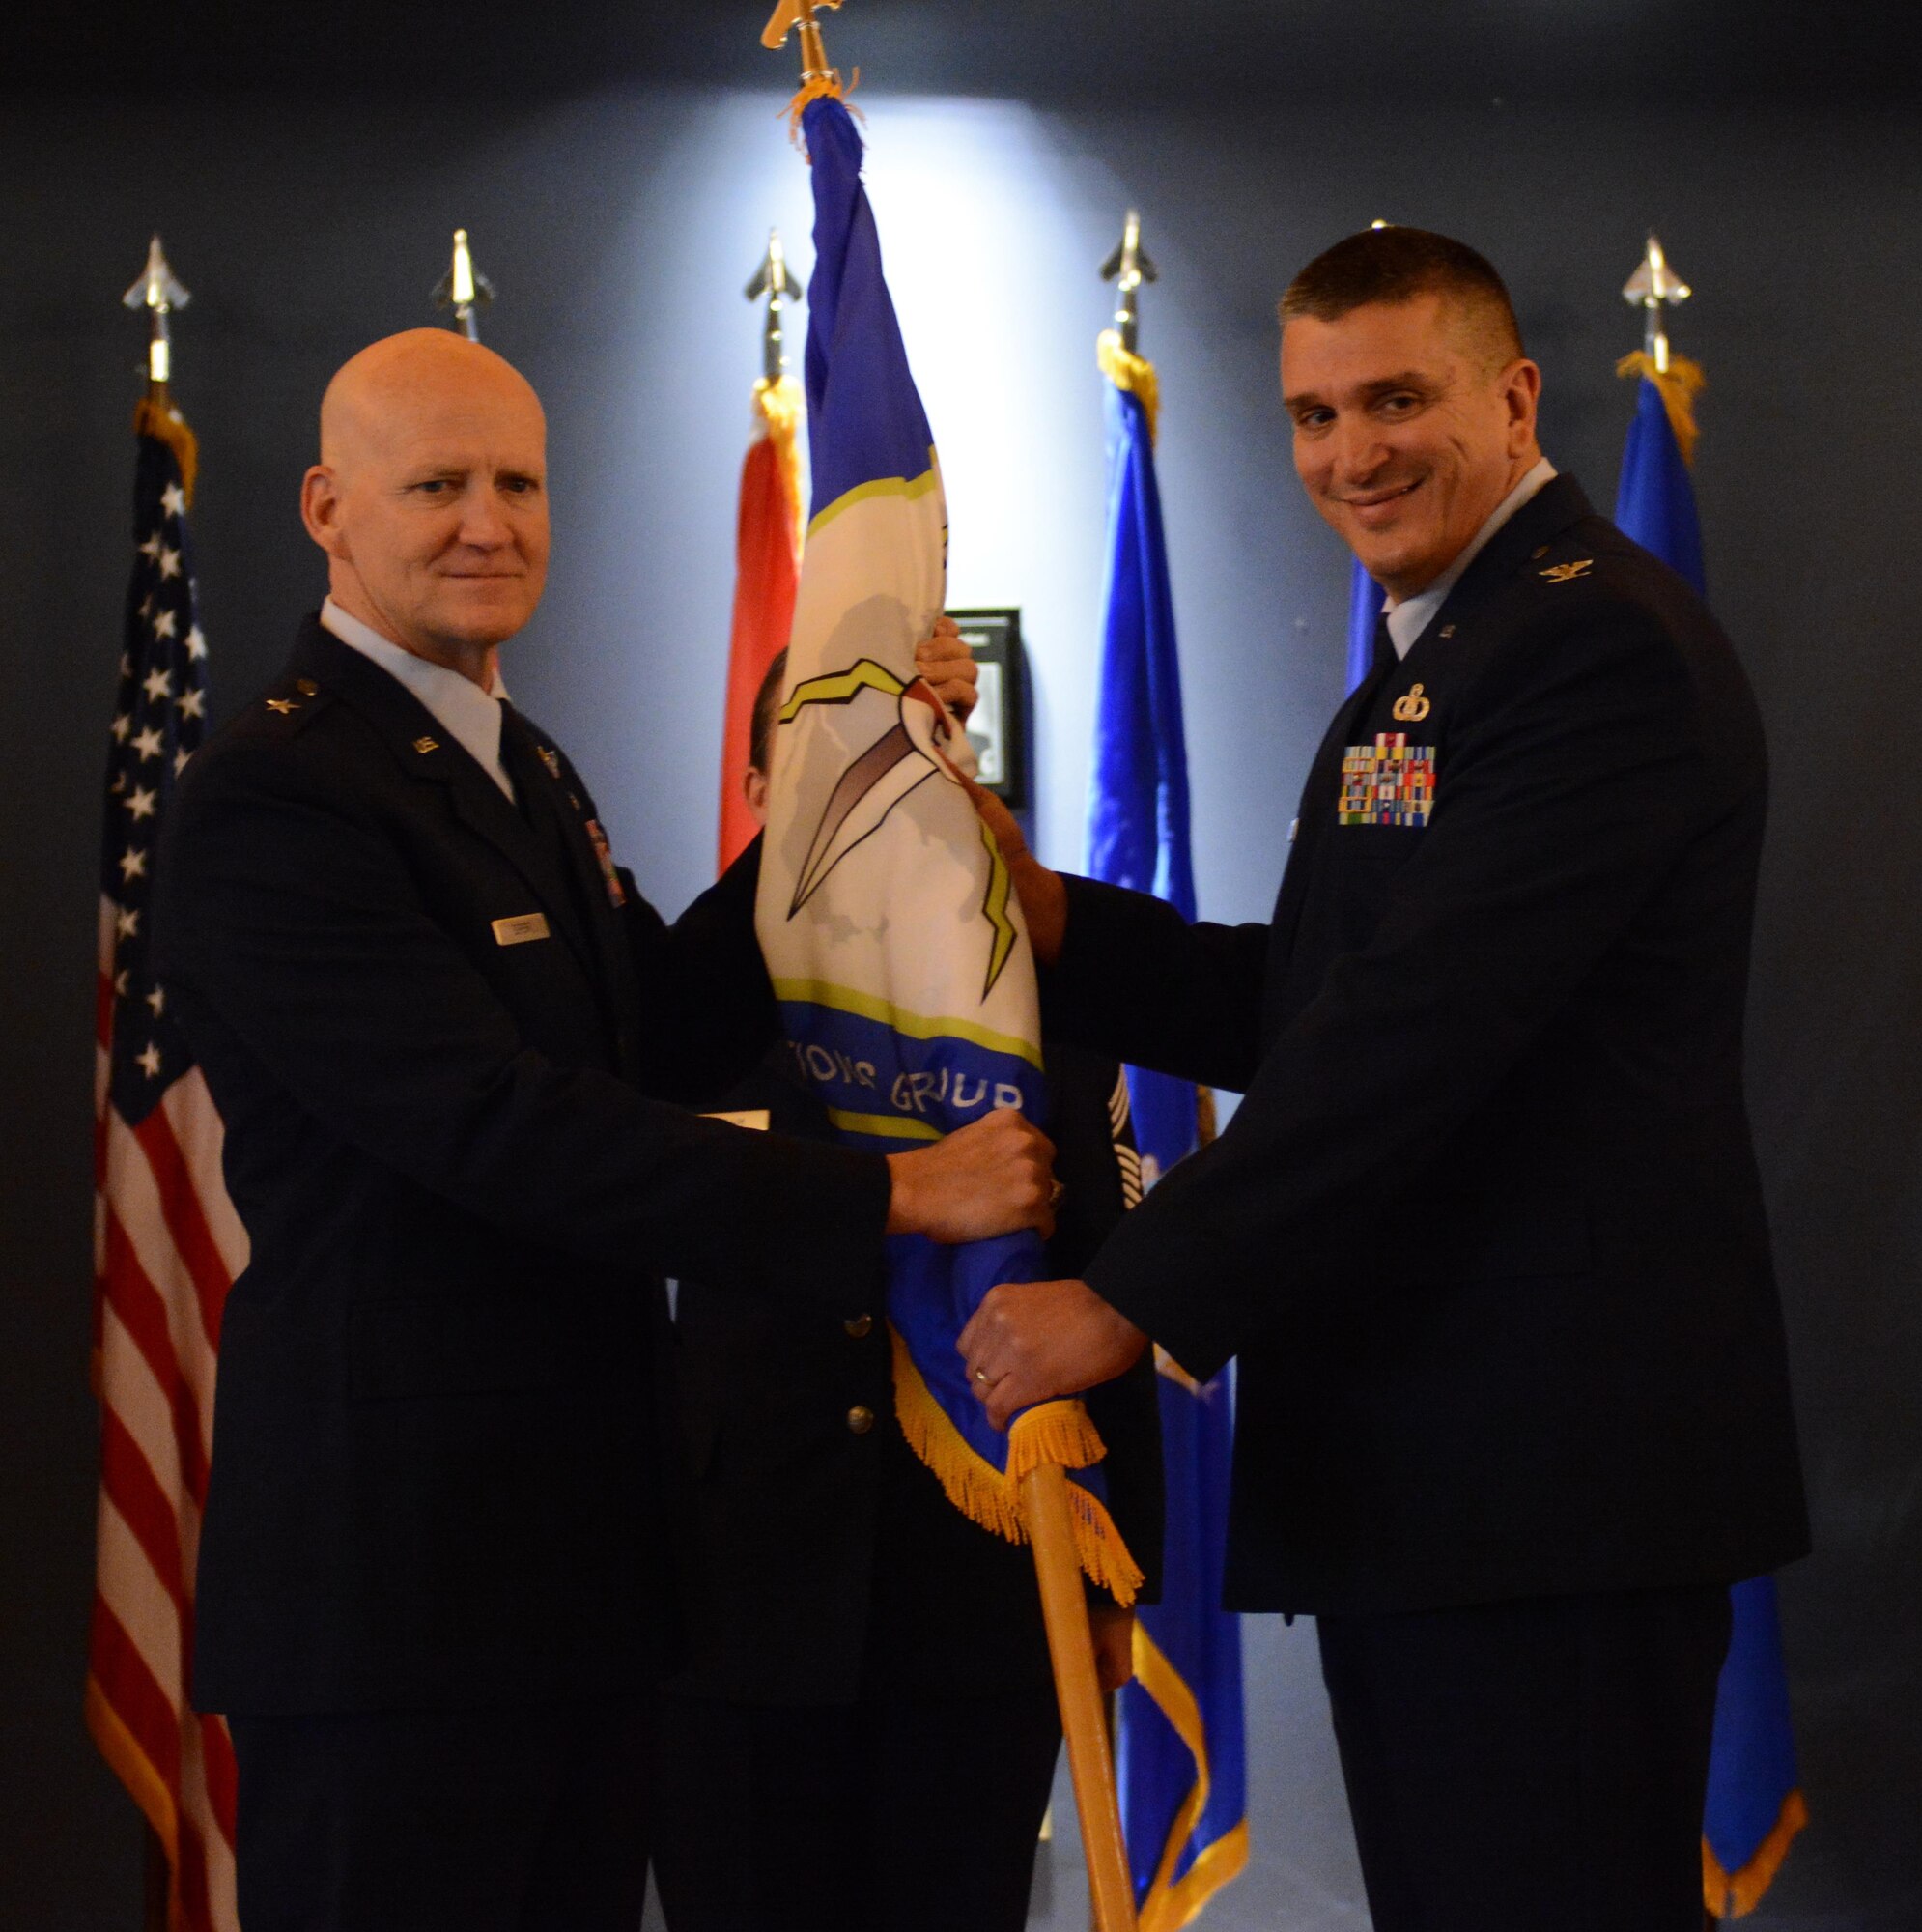 Col. Michael A Valle, 601st Air Operations Center Combat Operations Division chief, takes the ceremonial flag from Brig. Gen. Jim Eifert, Florida Air National Guard commander, during the 101st Air and Space Operations Group change of command ceremony on Tyndall Air Force Base, Florida Jan. 5. The passing of the flag symbolizes Valle's acceptance of command of the 101st AOG.